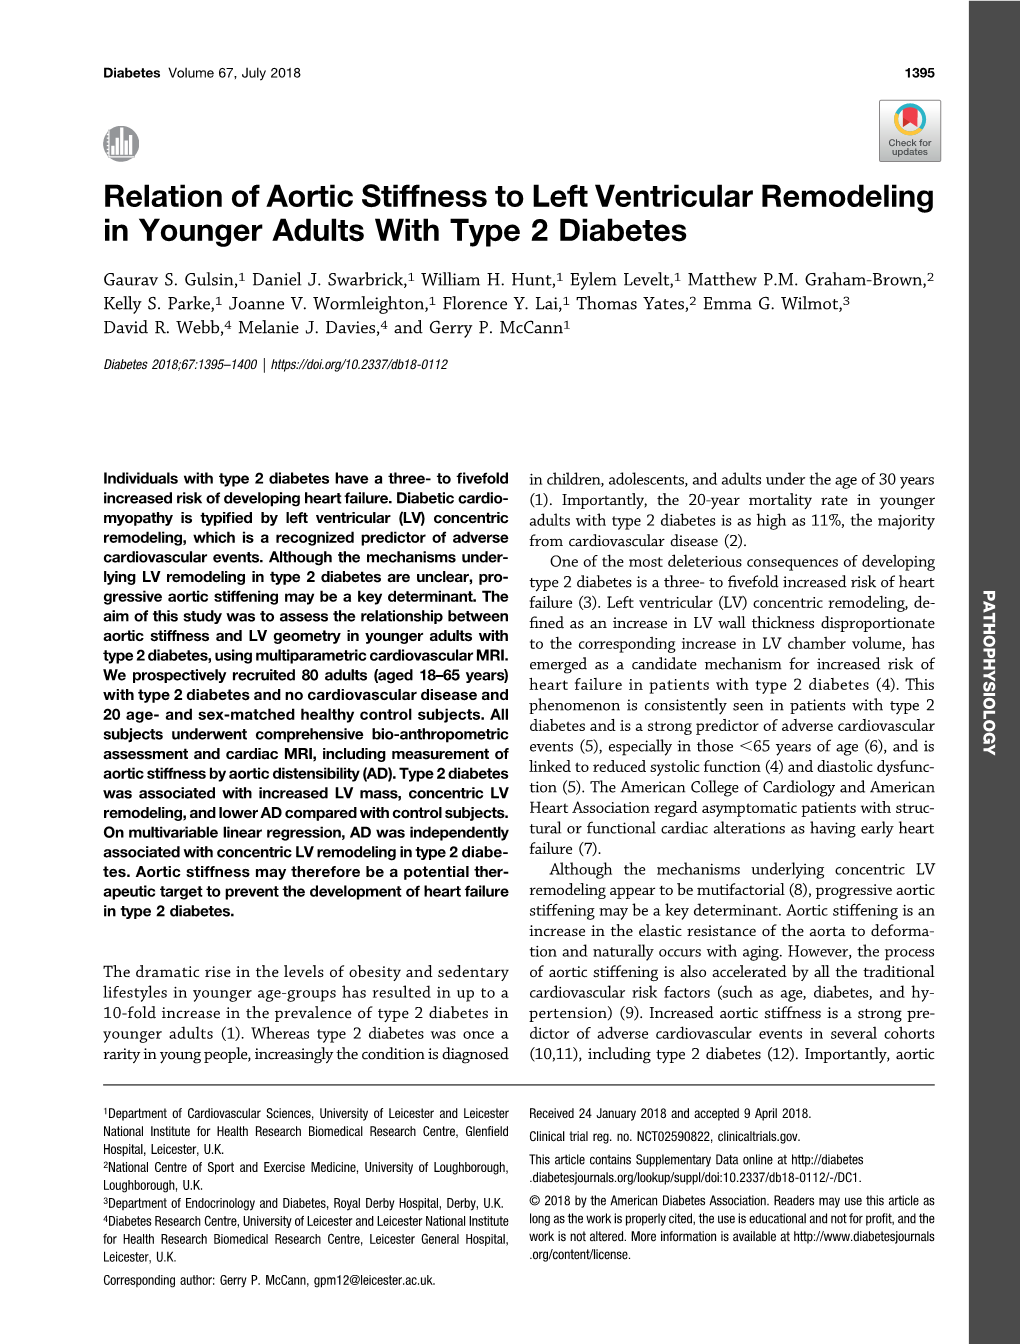 Relation of Aortic Stiffness to Left Ventricular Remodeling in Younger Adults with Type 2 Diabetes